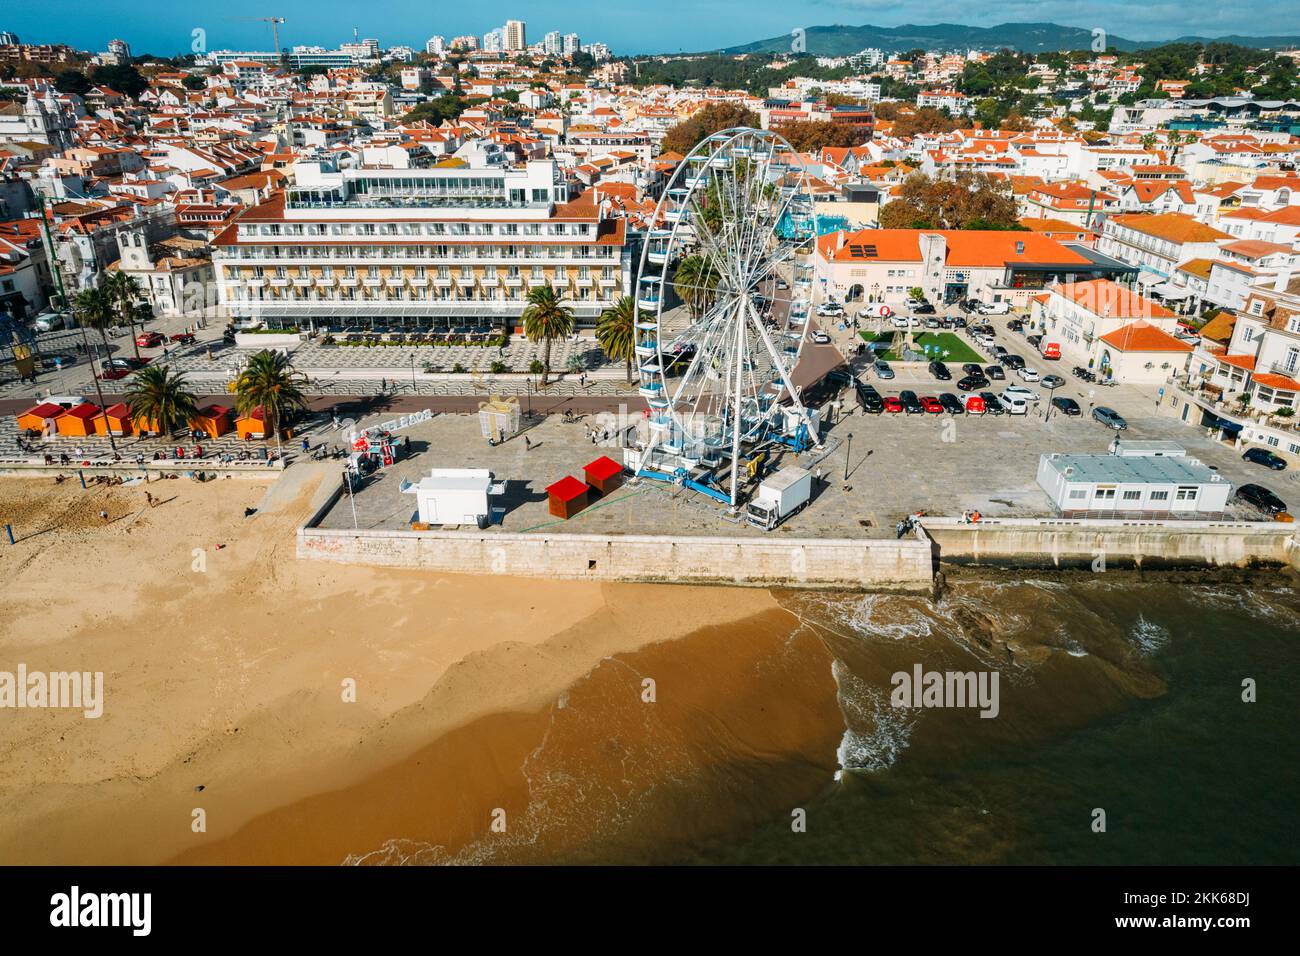 Aerial view of Cascais bay, Portugal with giant ferris wheel visible which was set up for the Christmas season Stock Photo